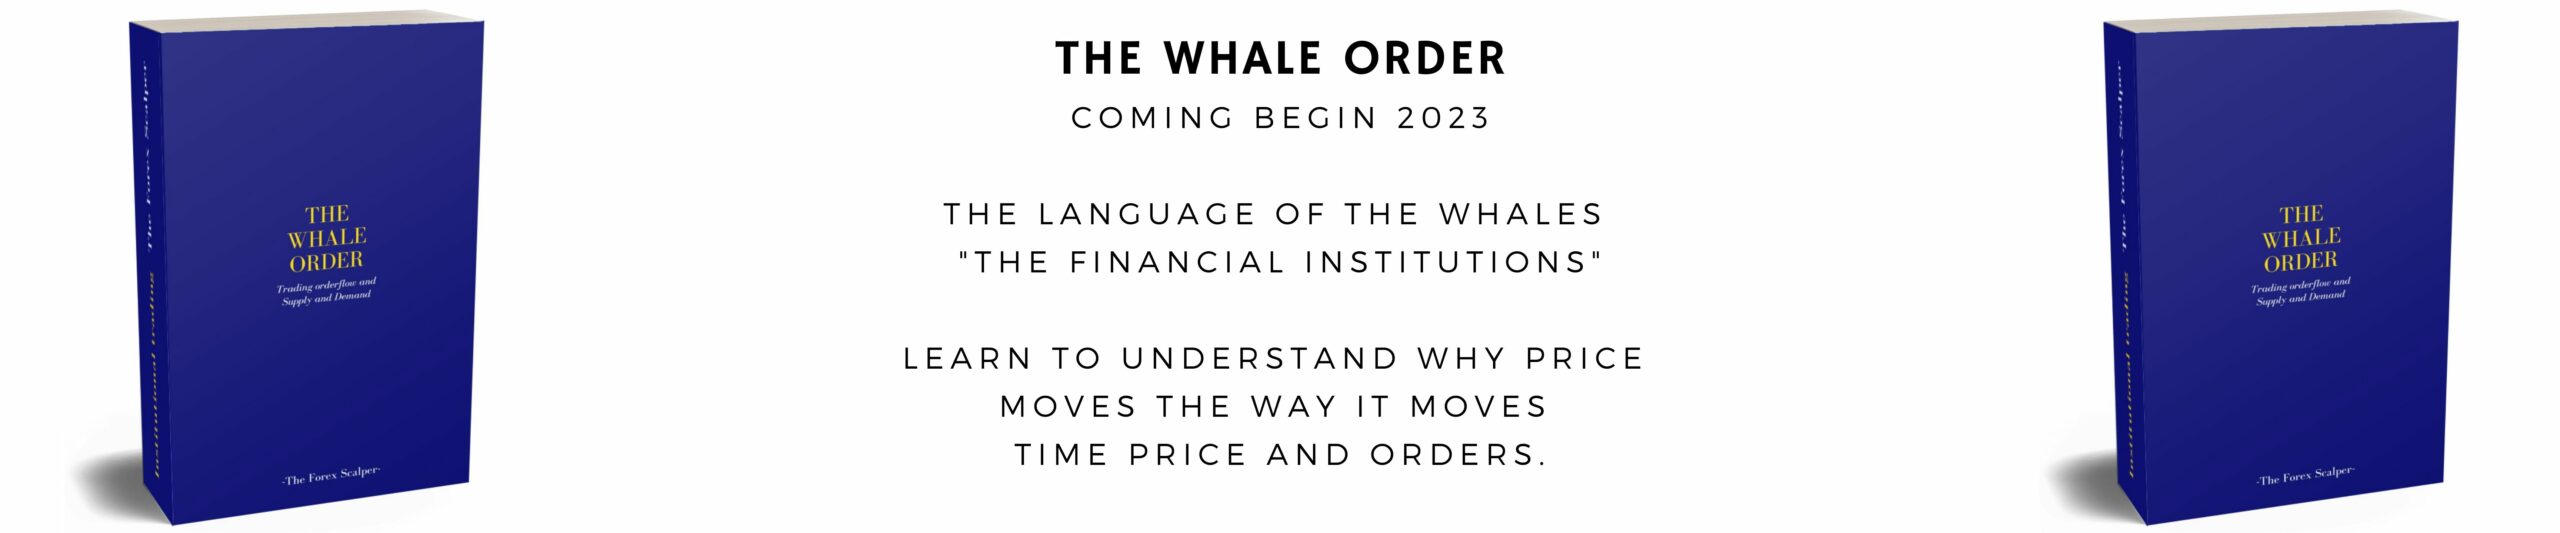 the whale order